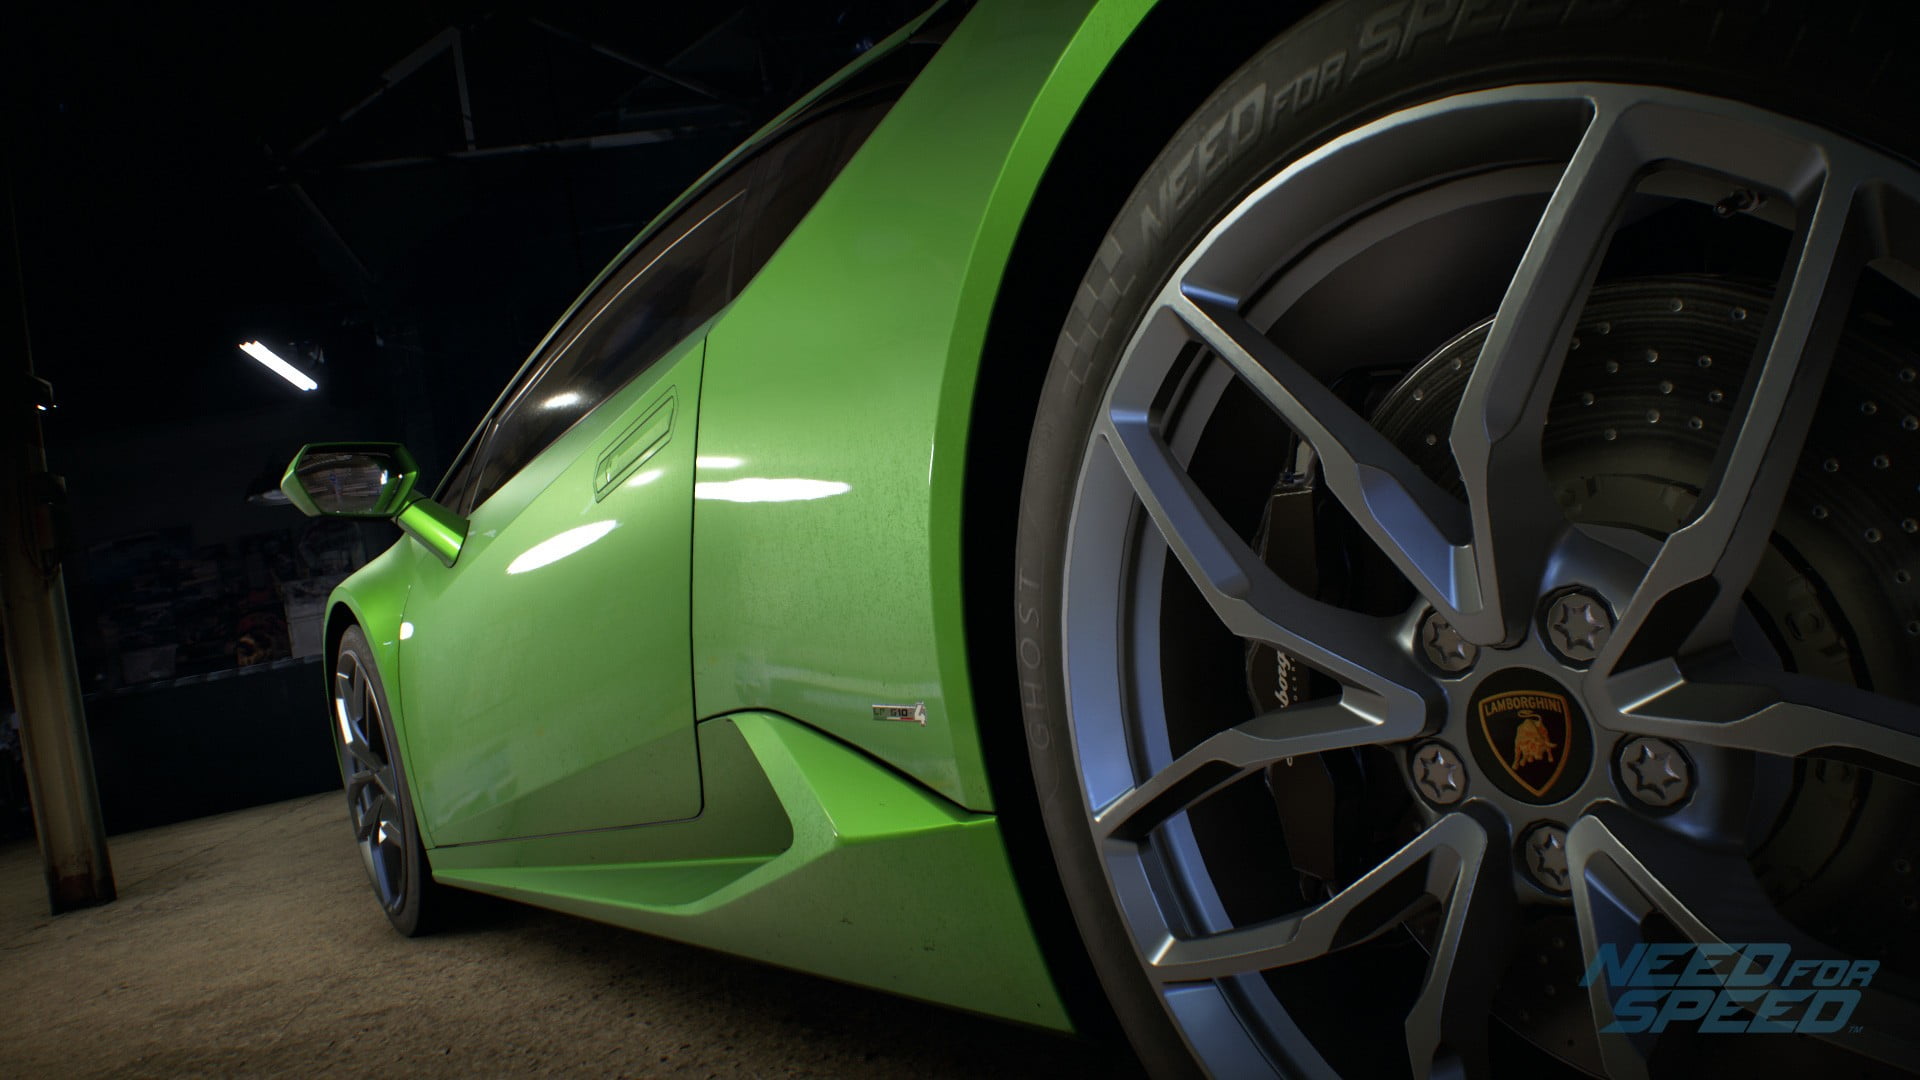 Green Need For Speed Coupe Need For Speed Lamborghini Car Hd Wallpaper Wallpaper Flare